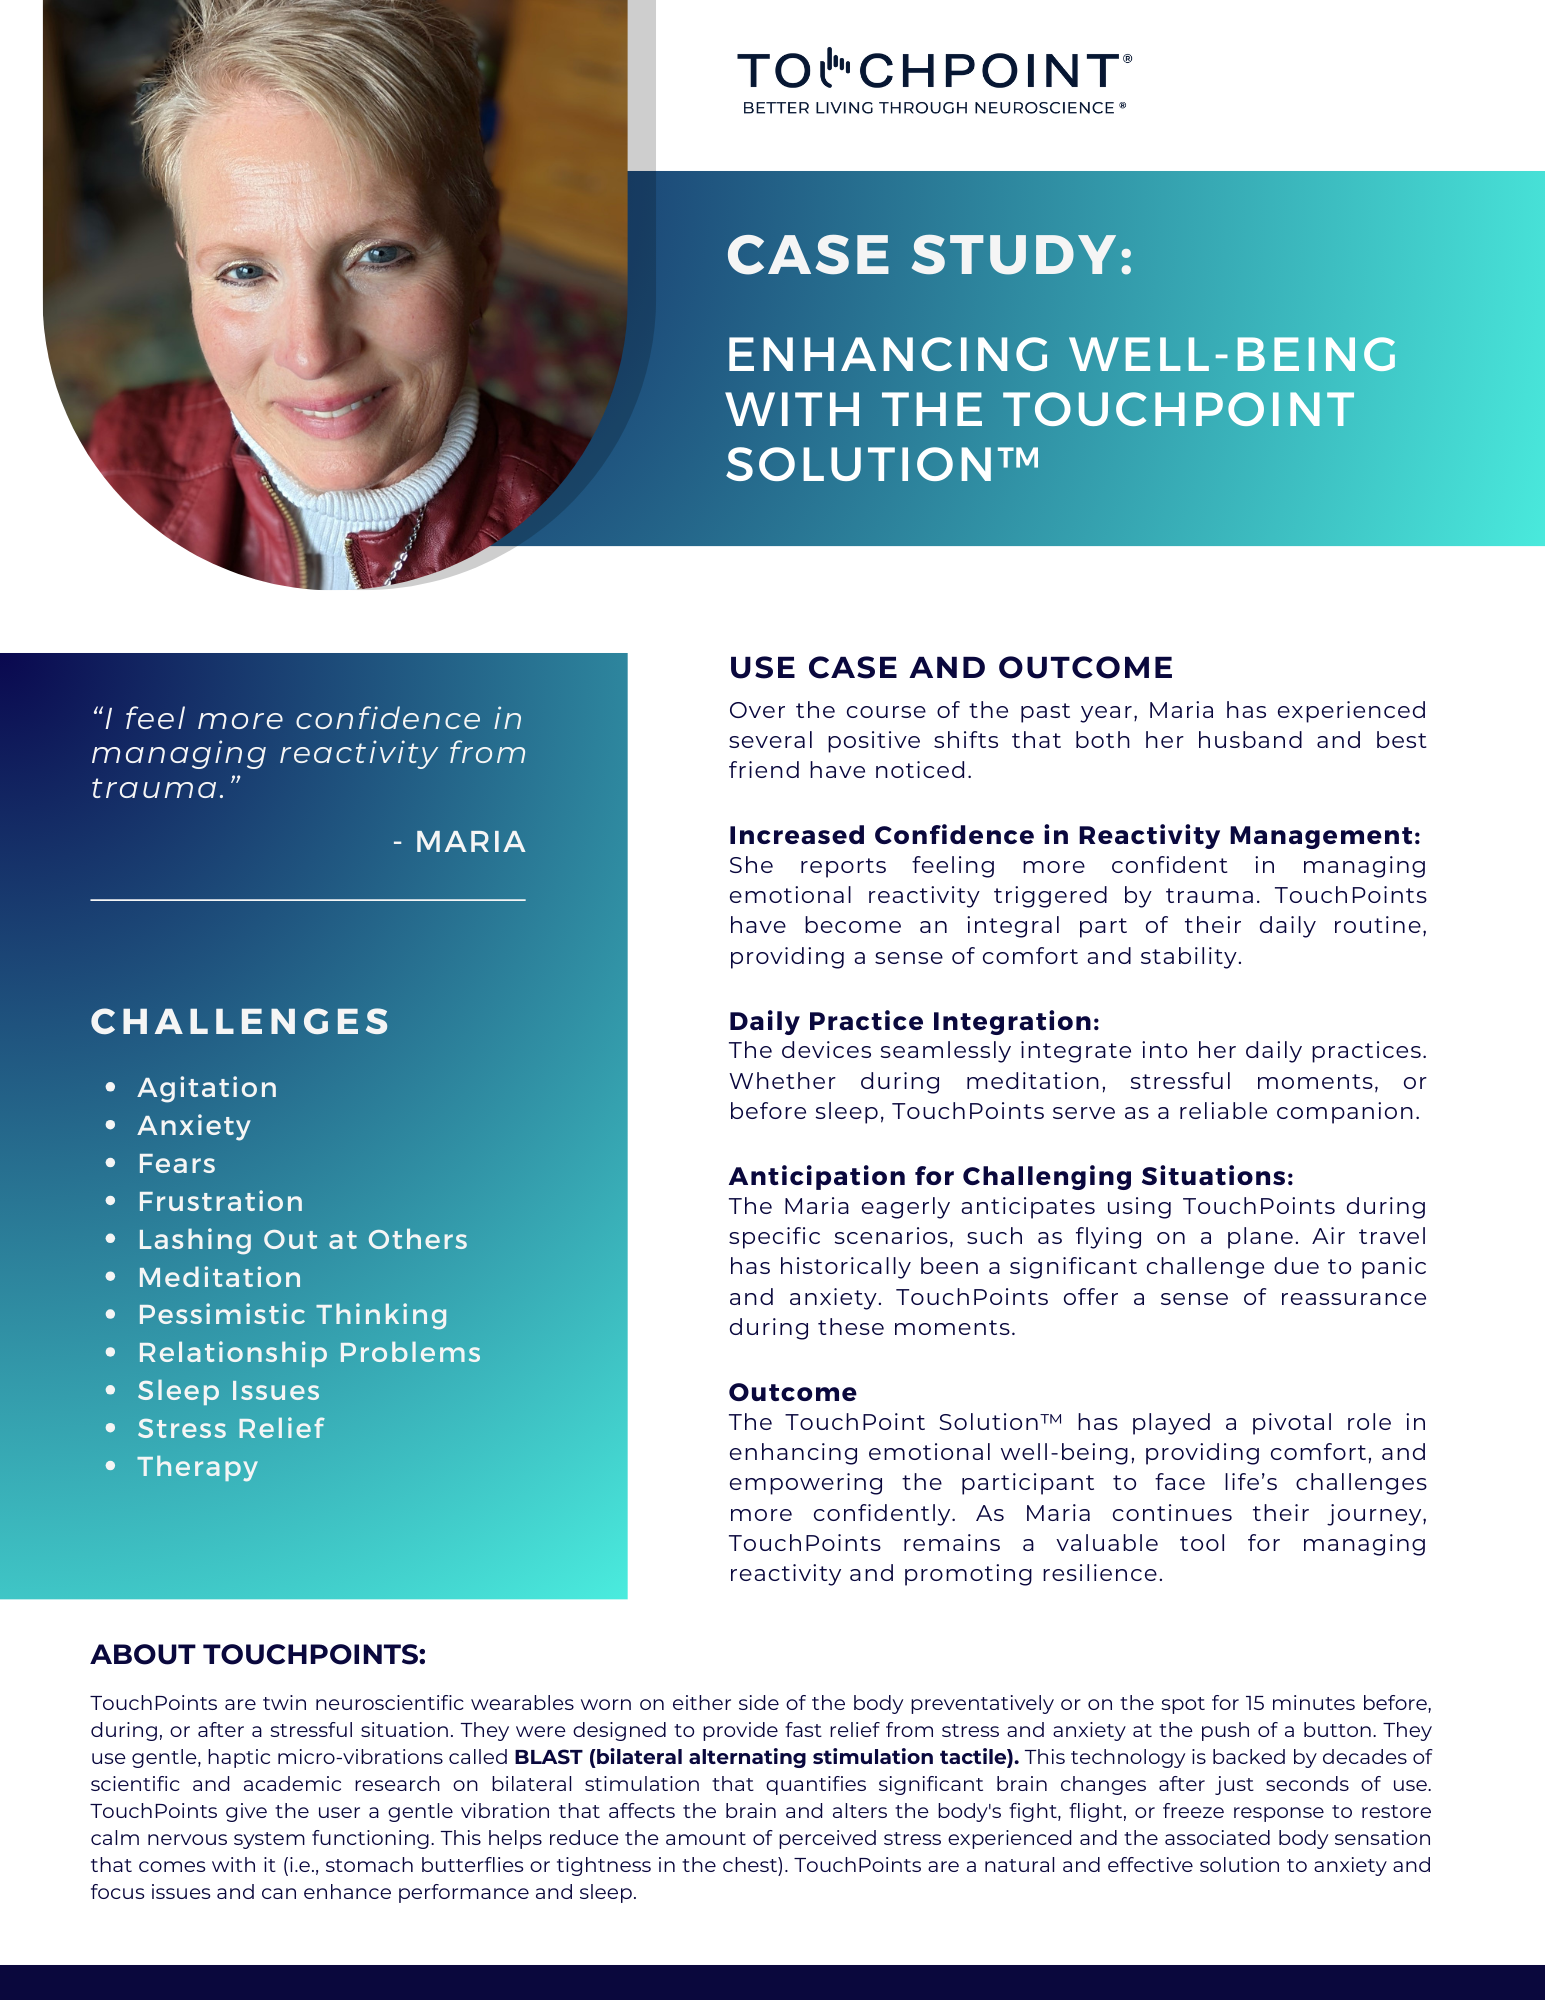 Case Study: Enhancing Well-being with the Touchpoint Solution™